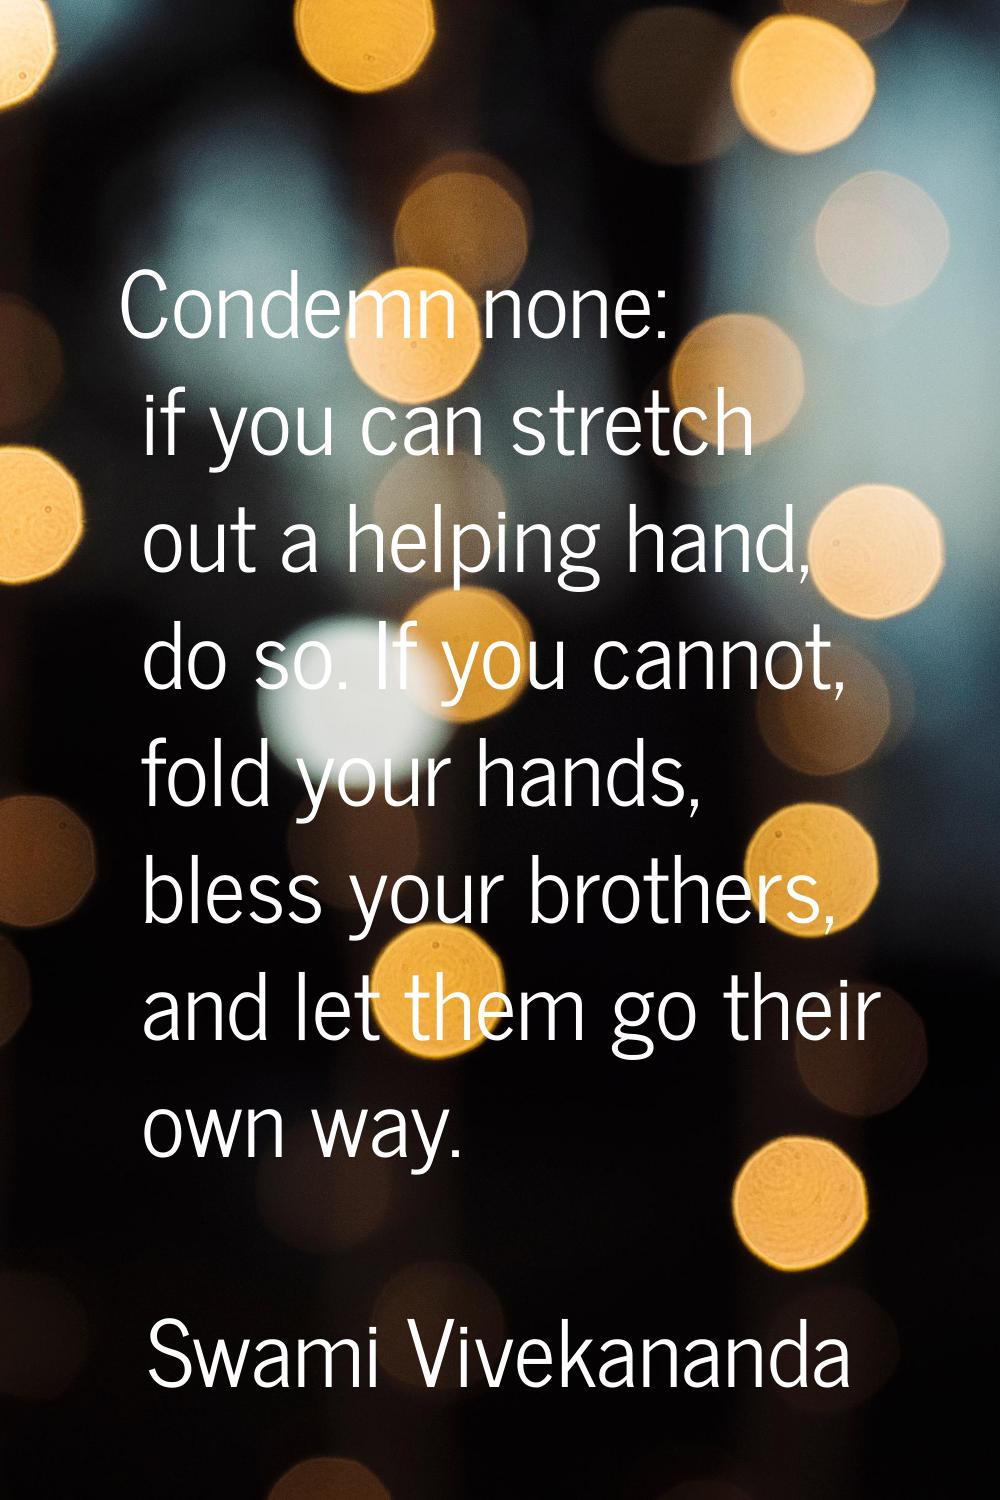 Condemn none: if you can stretch out a helping hand, do so. If you cannot, fold your hands, bless y